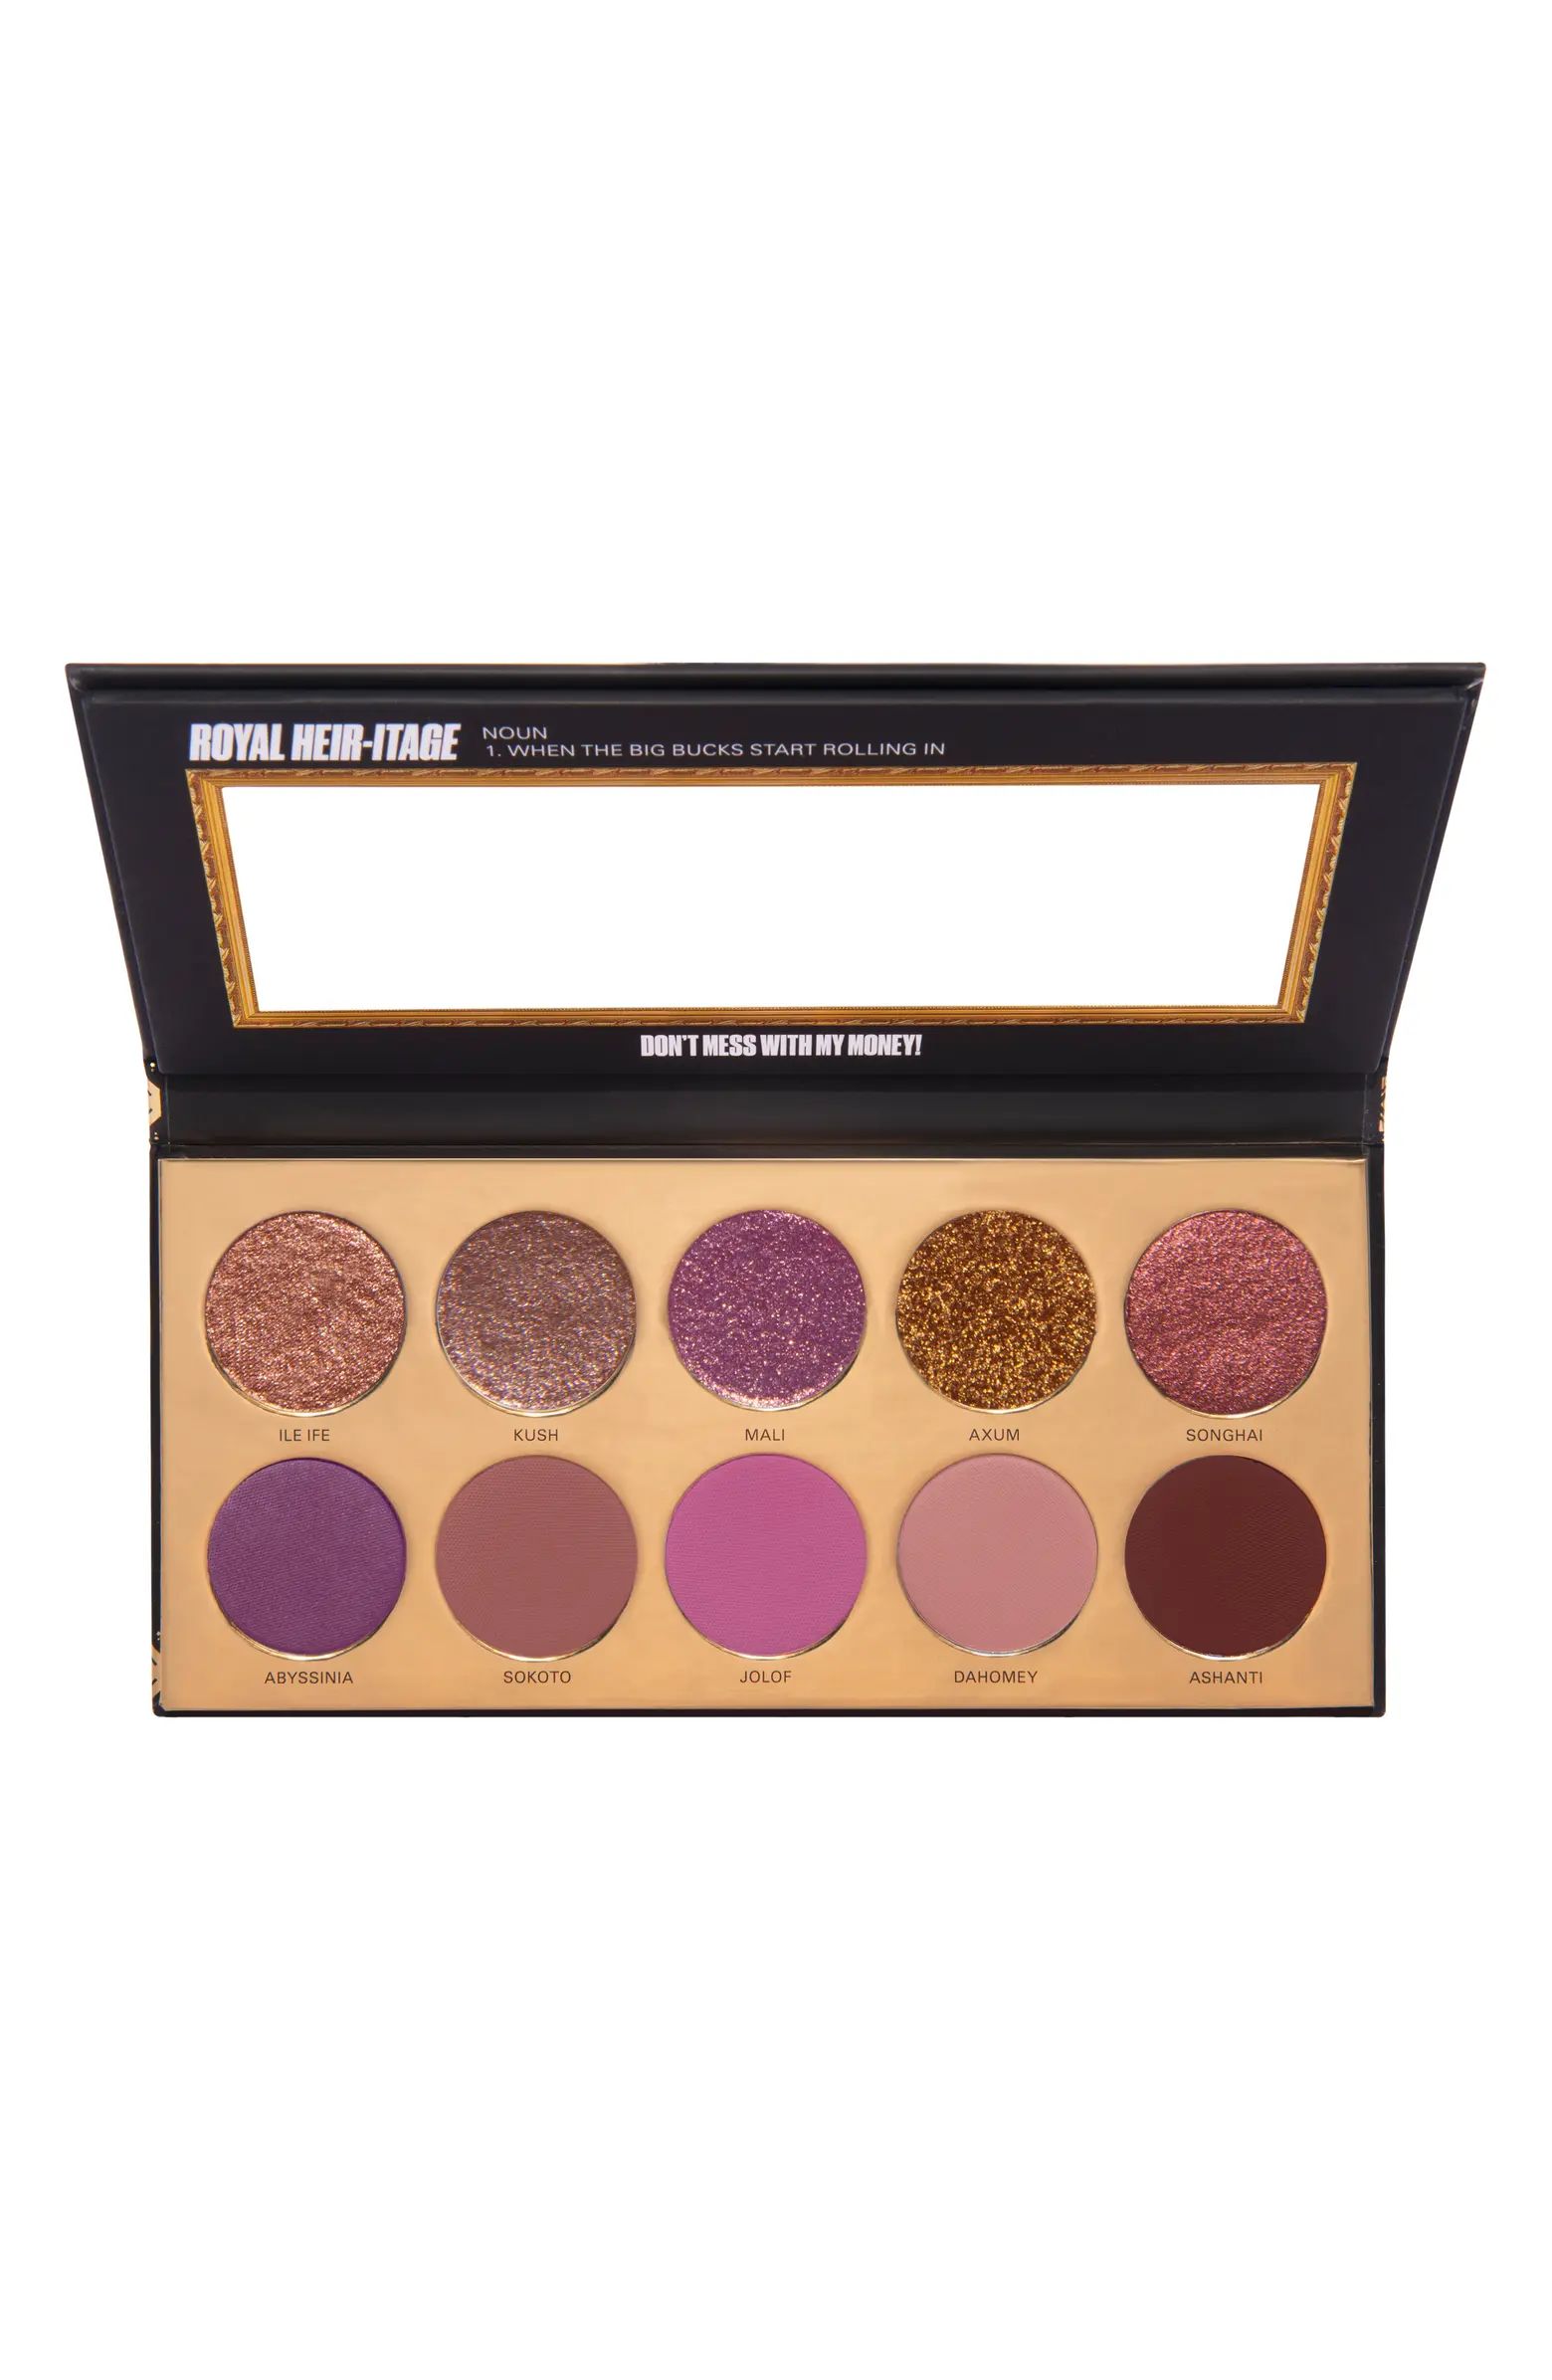 Black Magic 'Coming 2 America' Royal Heir-itage Color Palette | Nordstrom